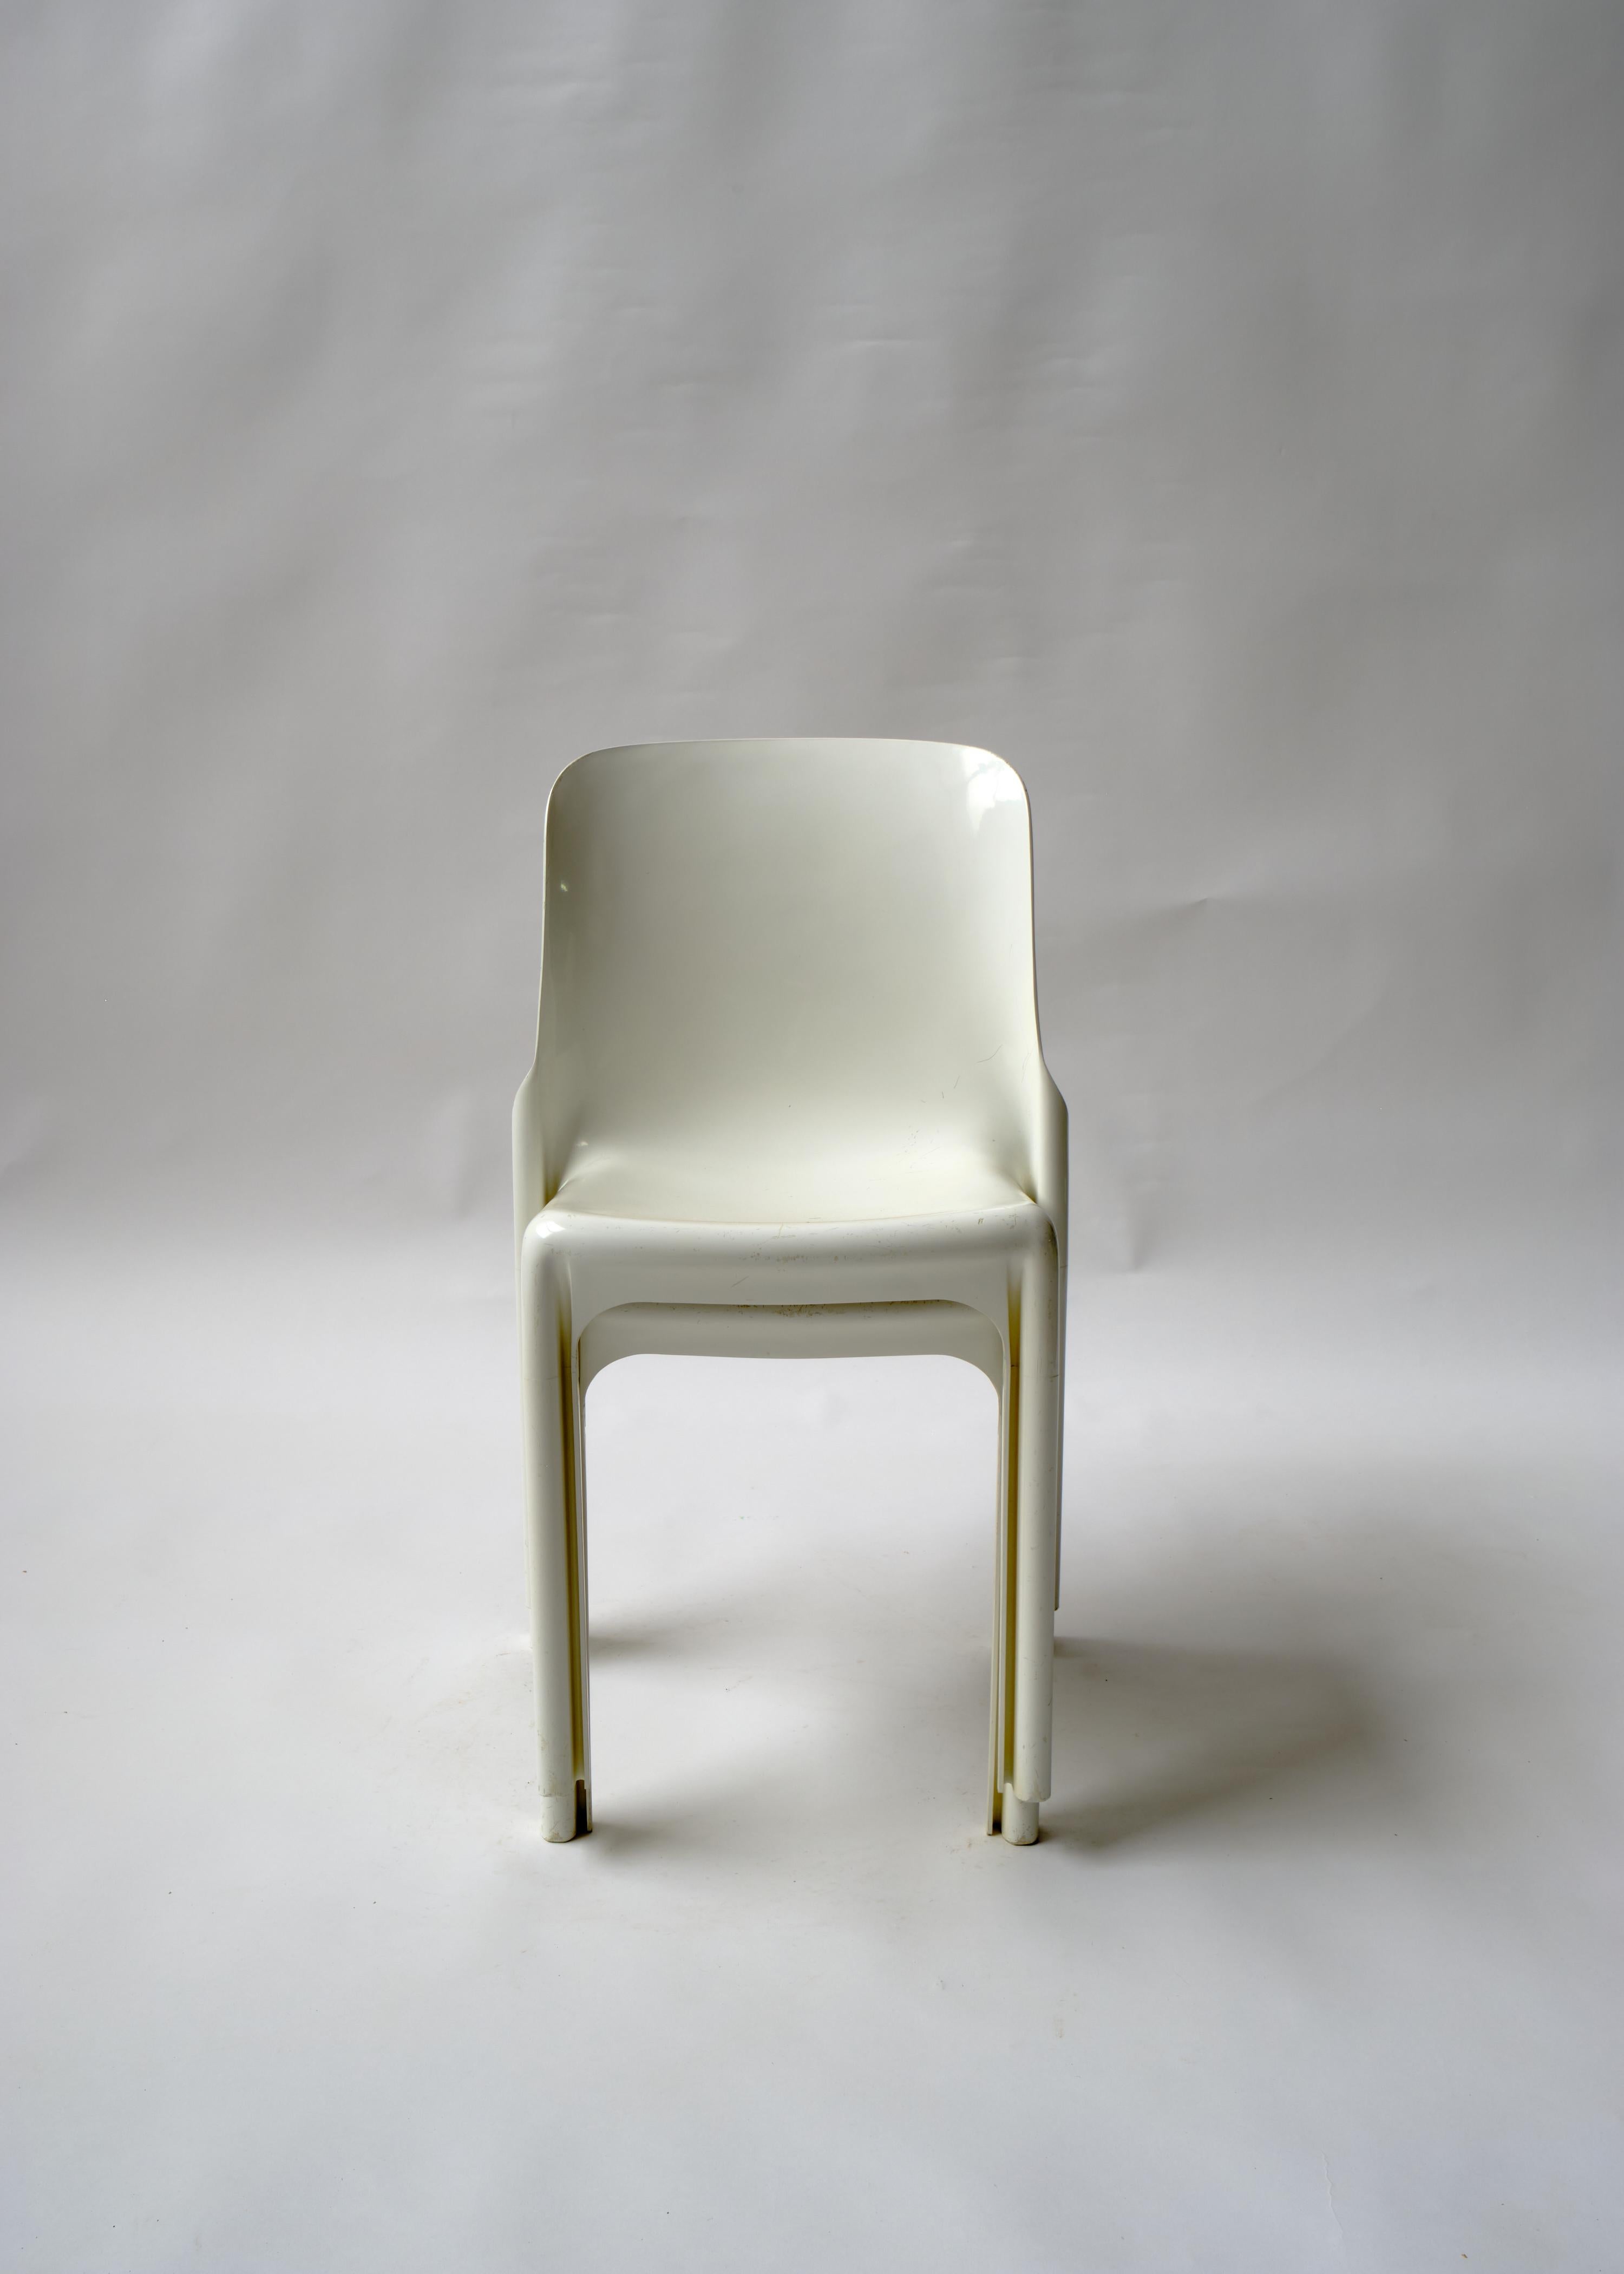 Vico Magistretti’s Selene was one of the first commercially produced chairs pressed from a single sheet of plastic.

The Selene was first conceived by Magistretti in 1961 but it took several years working alongside the technicians and model makers